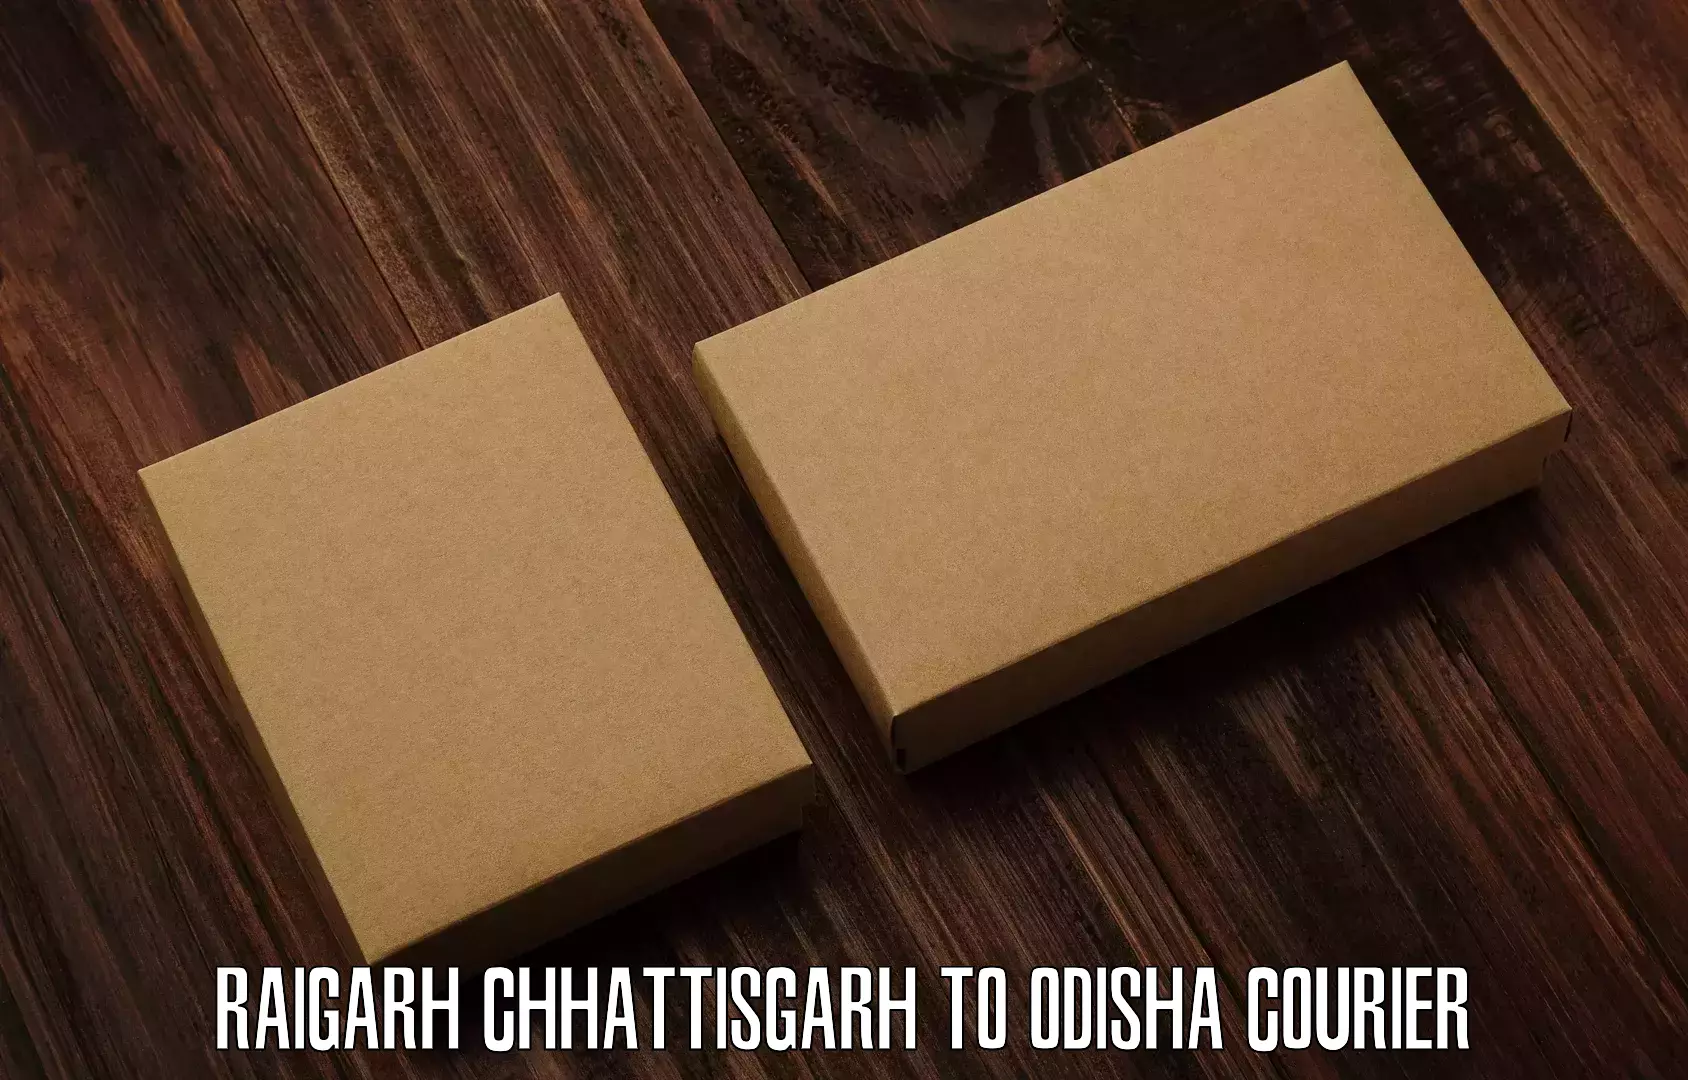 Reliable courier services Raigarh Chhattisgarh to Bonth